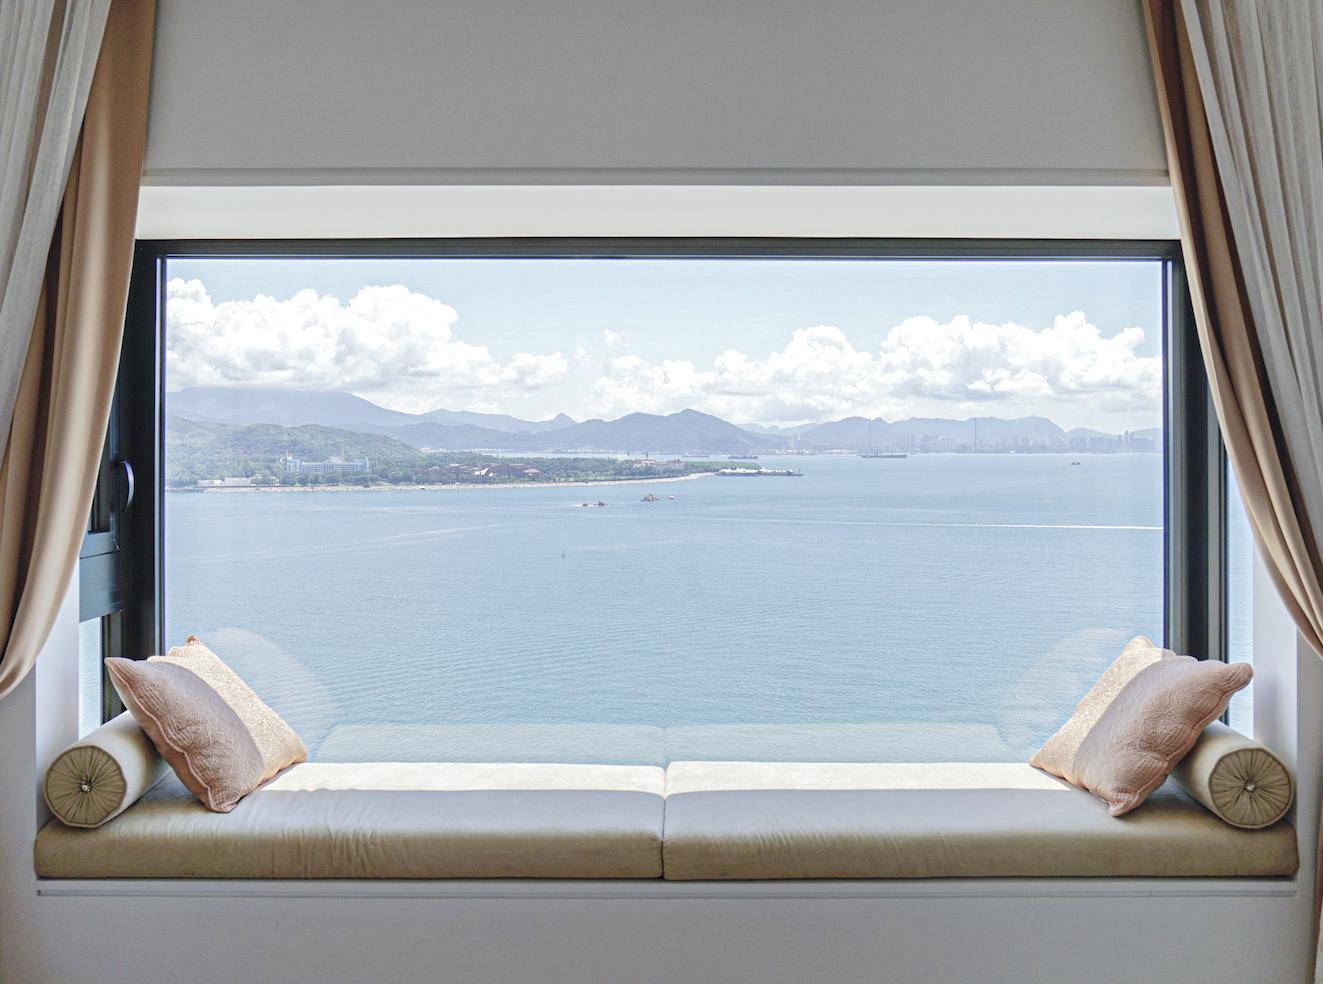 This Hong Kong Home Reimagines the Use of Picture Windows into a Pilgrimage of Light